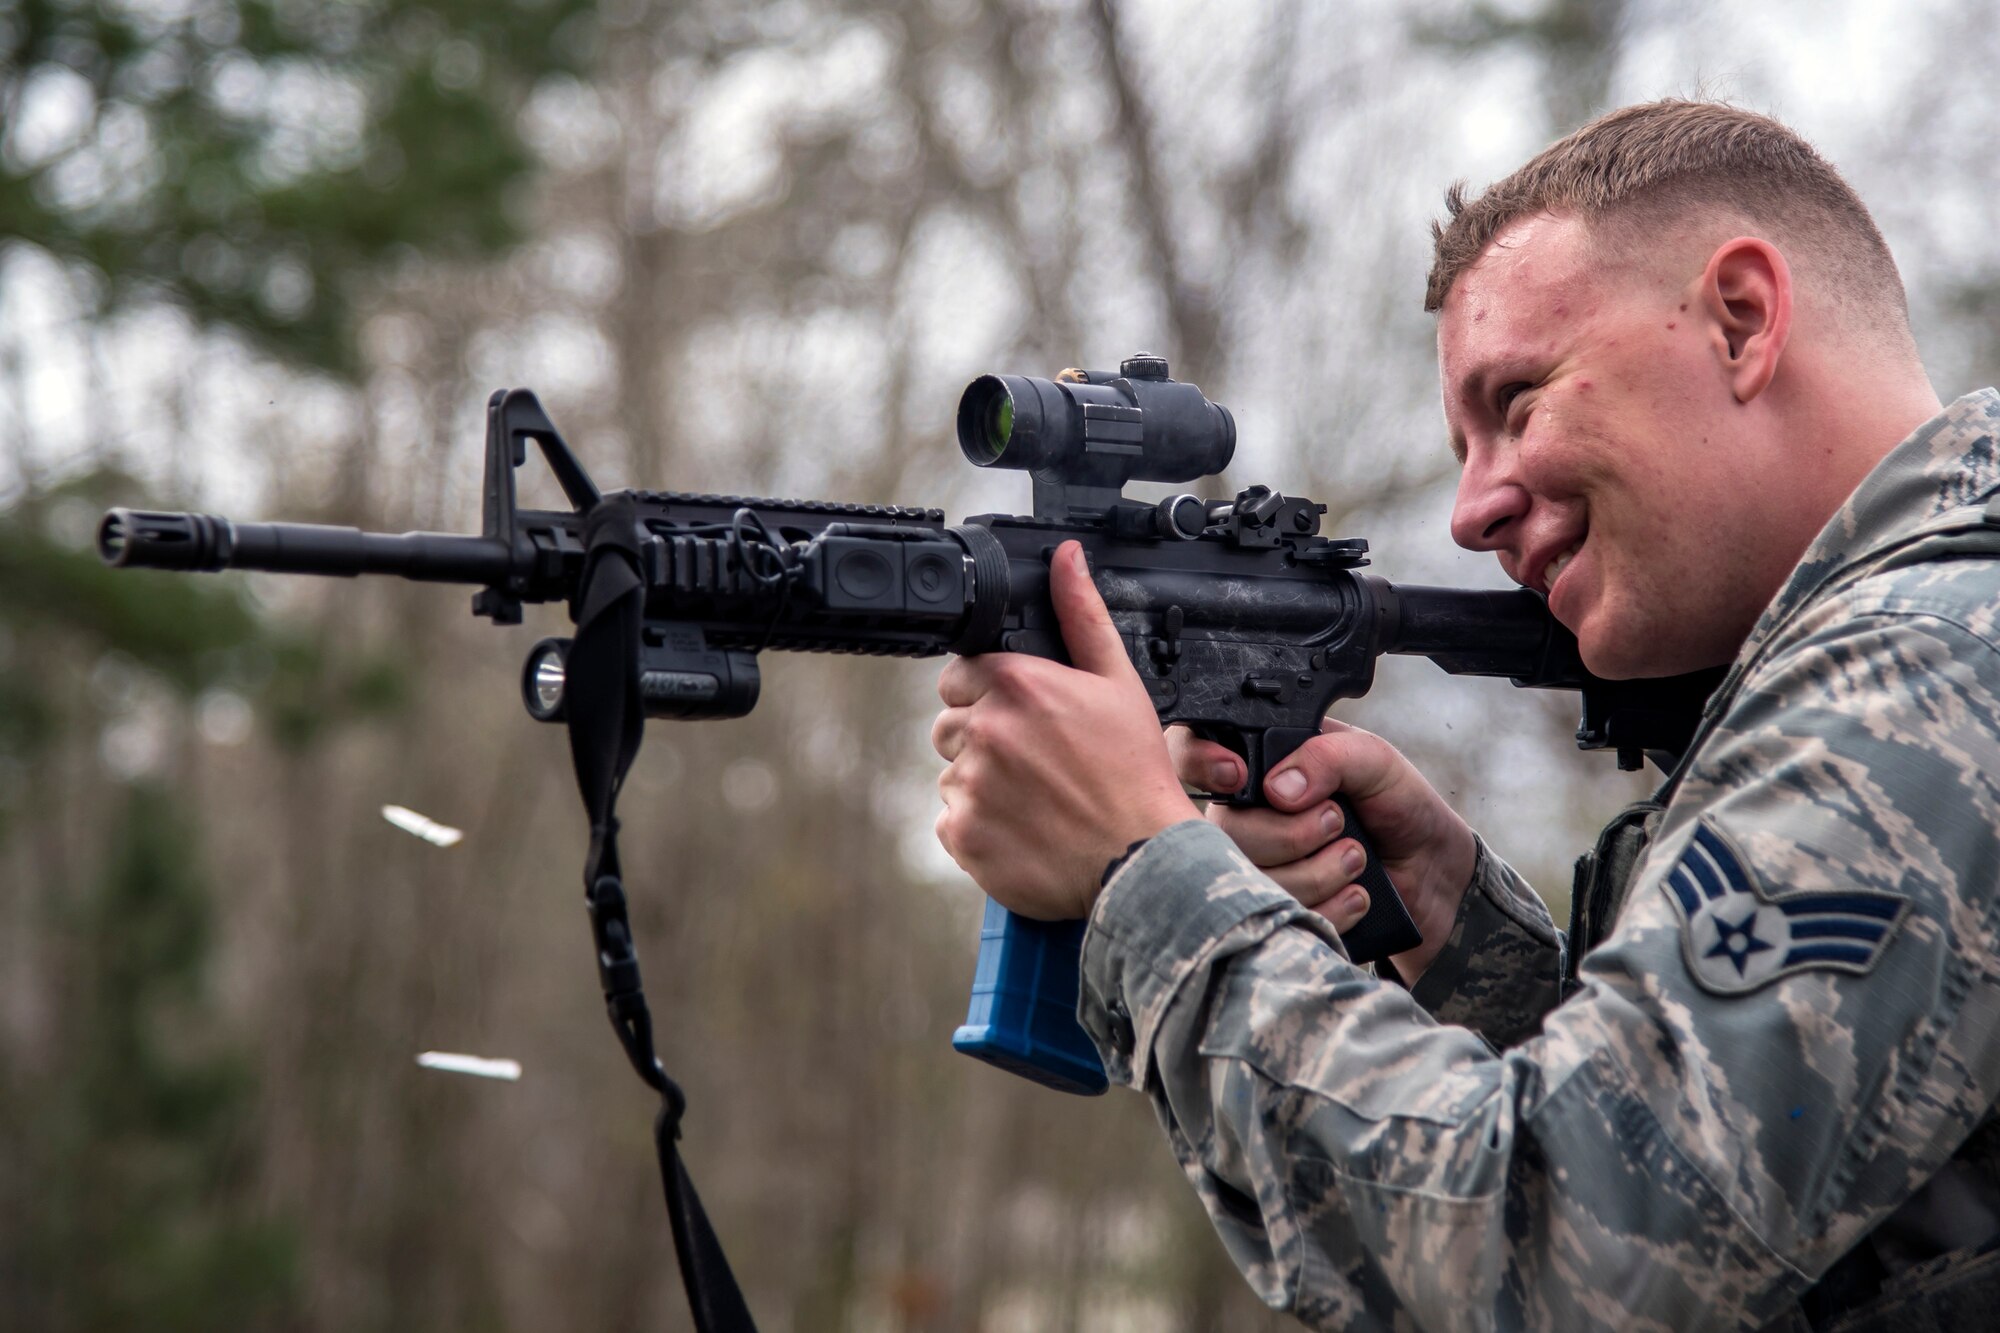 Senior Airman Adam Irwin, 23d Security Forces Squadron installation patrolman, fires an M4 carbine after a training event, Feb. 22, 2018, at Moody Air Force Base, Ga.  The Shoot, move, communicate training event is designed to test participants on their ability to move from barricade to barricade as a team. To be successful, one member provided covering fire while others advanced on the enemy, then retreated from the scenario while they maintained cover fire. Security Forces members could employ these tactics anytime they’re under enemy fire.
(U.S. Air Force photo by Airman Eugene Oliver)